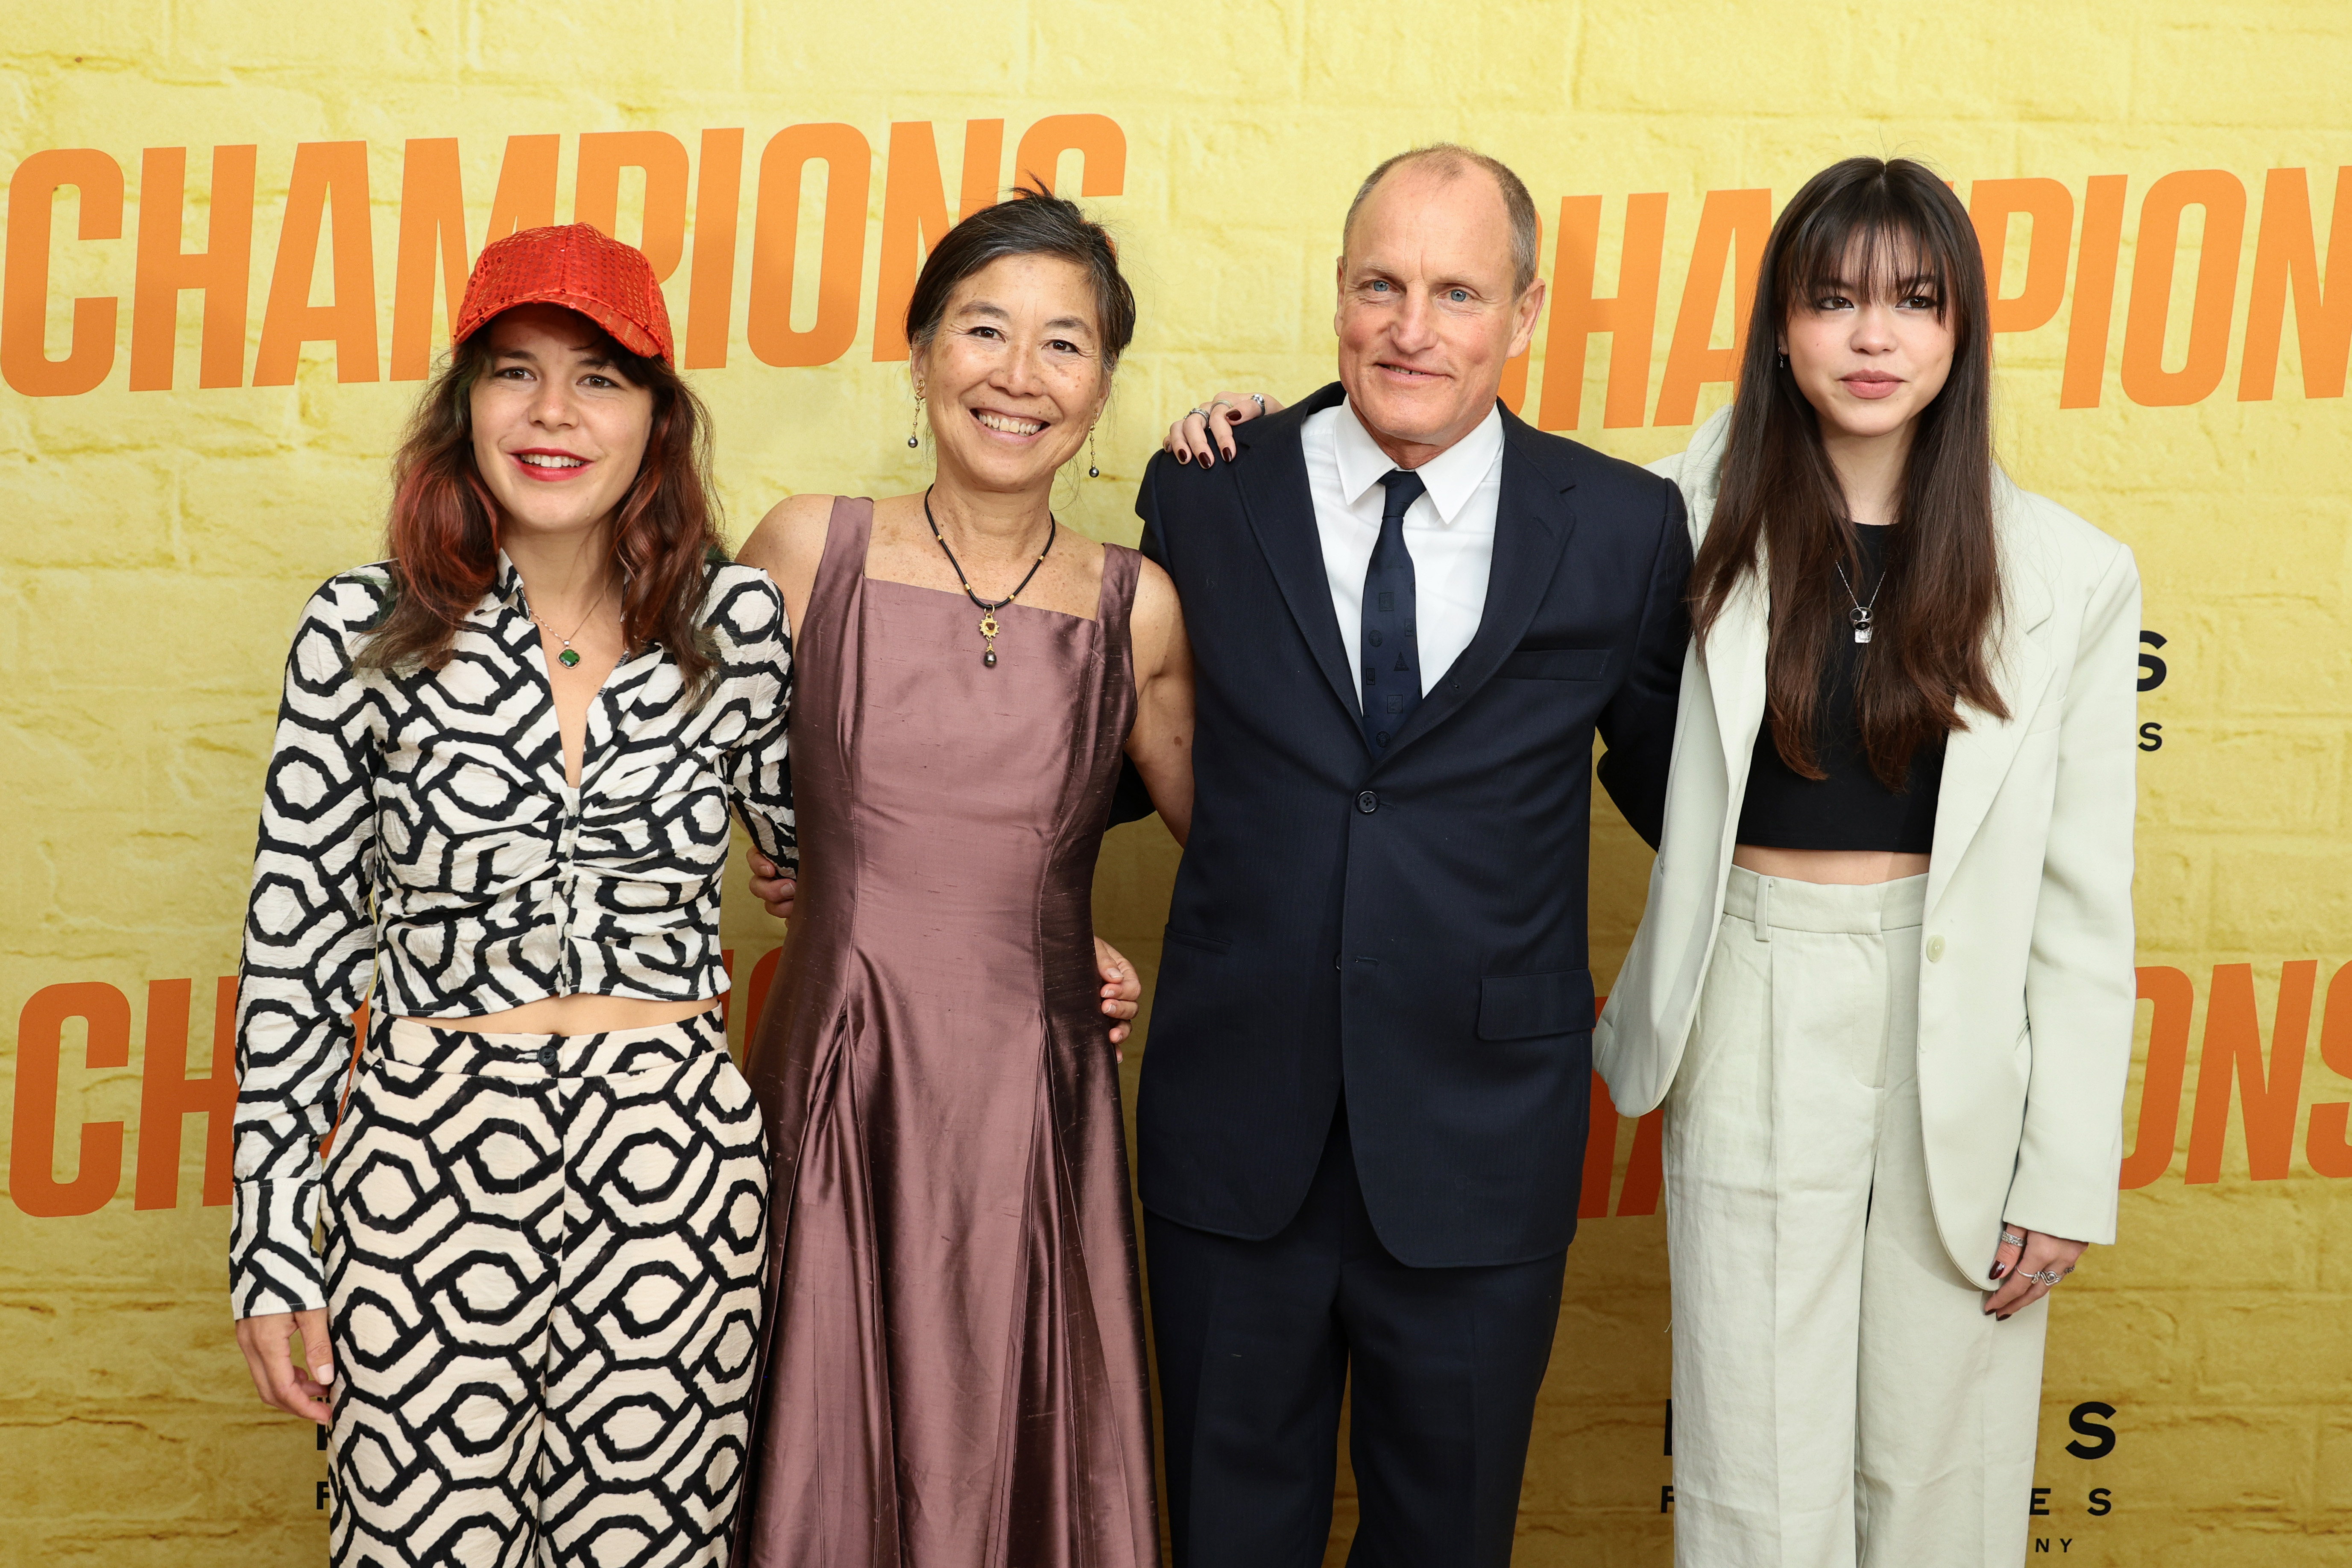 Laura Louie and Woody Harrelson with their two daughters, Deni and Makani Harrelson, at the premiere of "Champions" on February 27, 2023, in New York City | Source: Getty Images